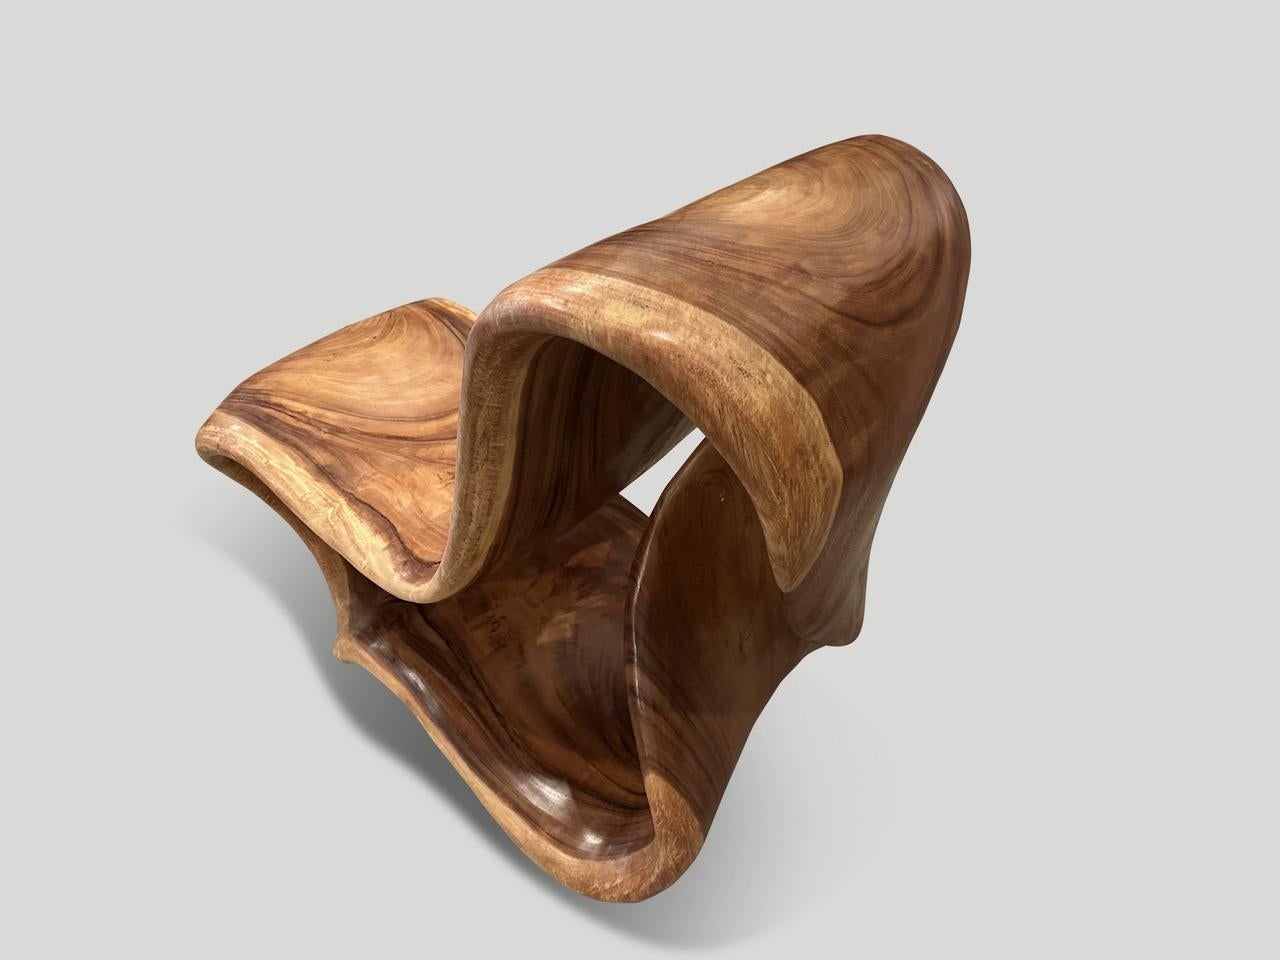 Contemporary Andrianna Shamaris Impressive Soar Wood Sculptural Chair  For Sale